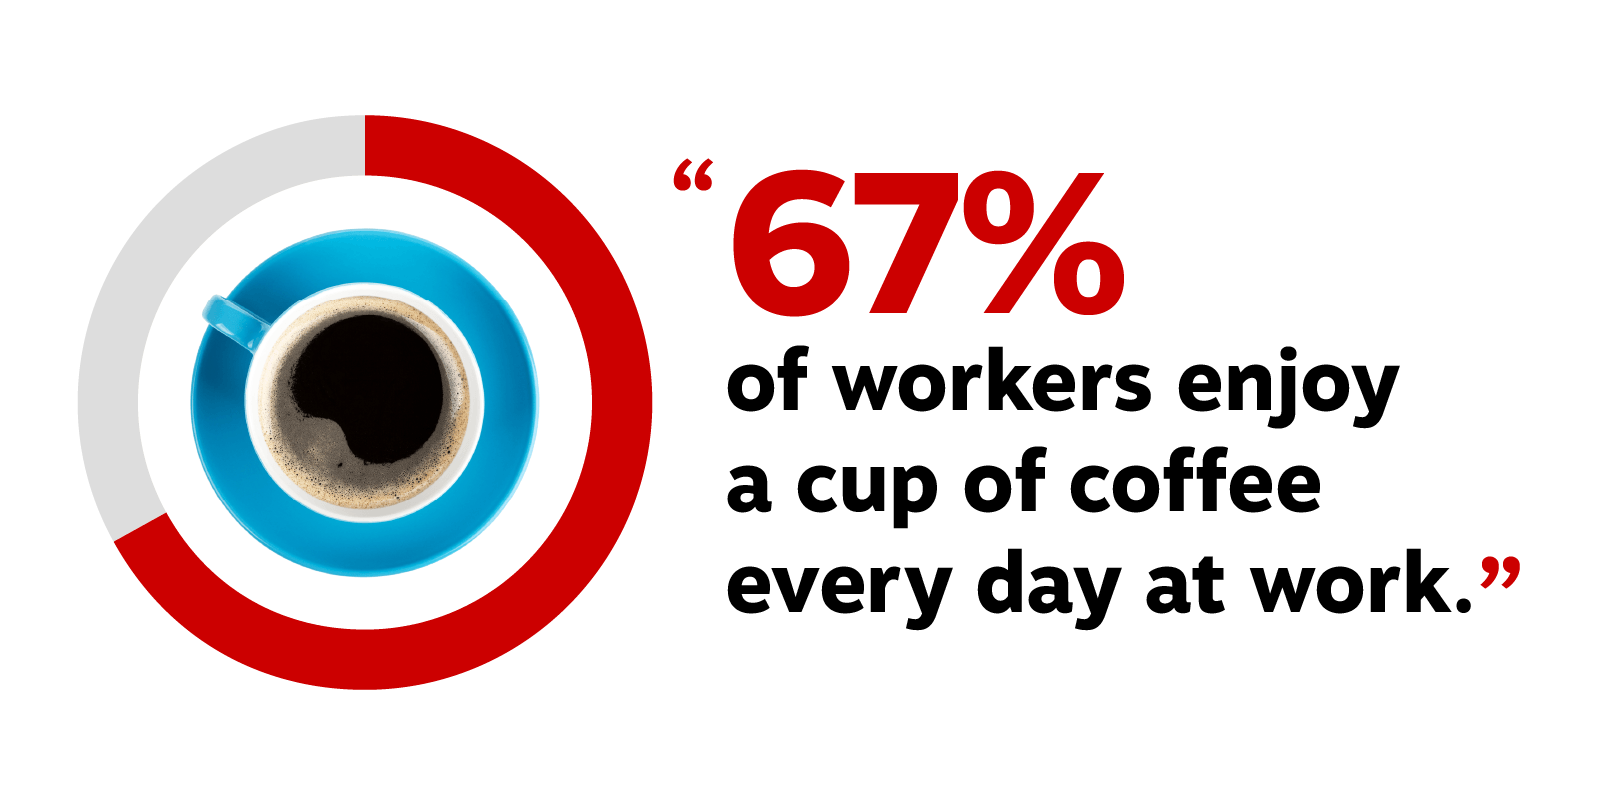 Coffee After COVID: Bringing Coffee Back to Work Safely